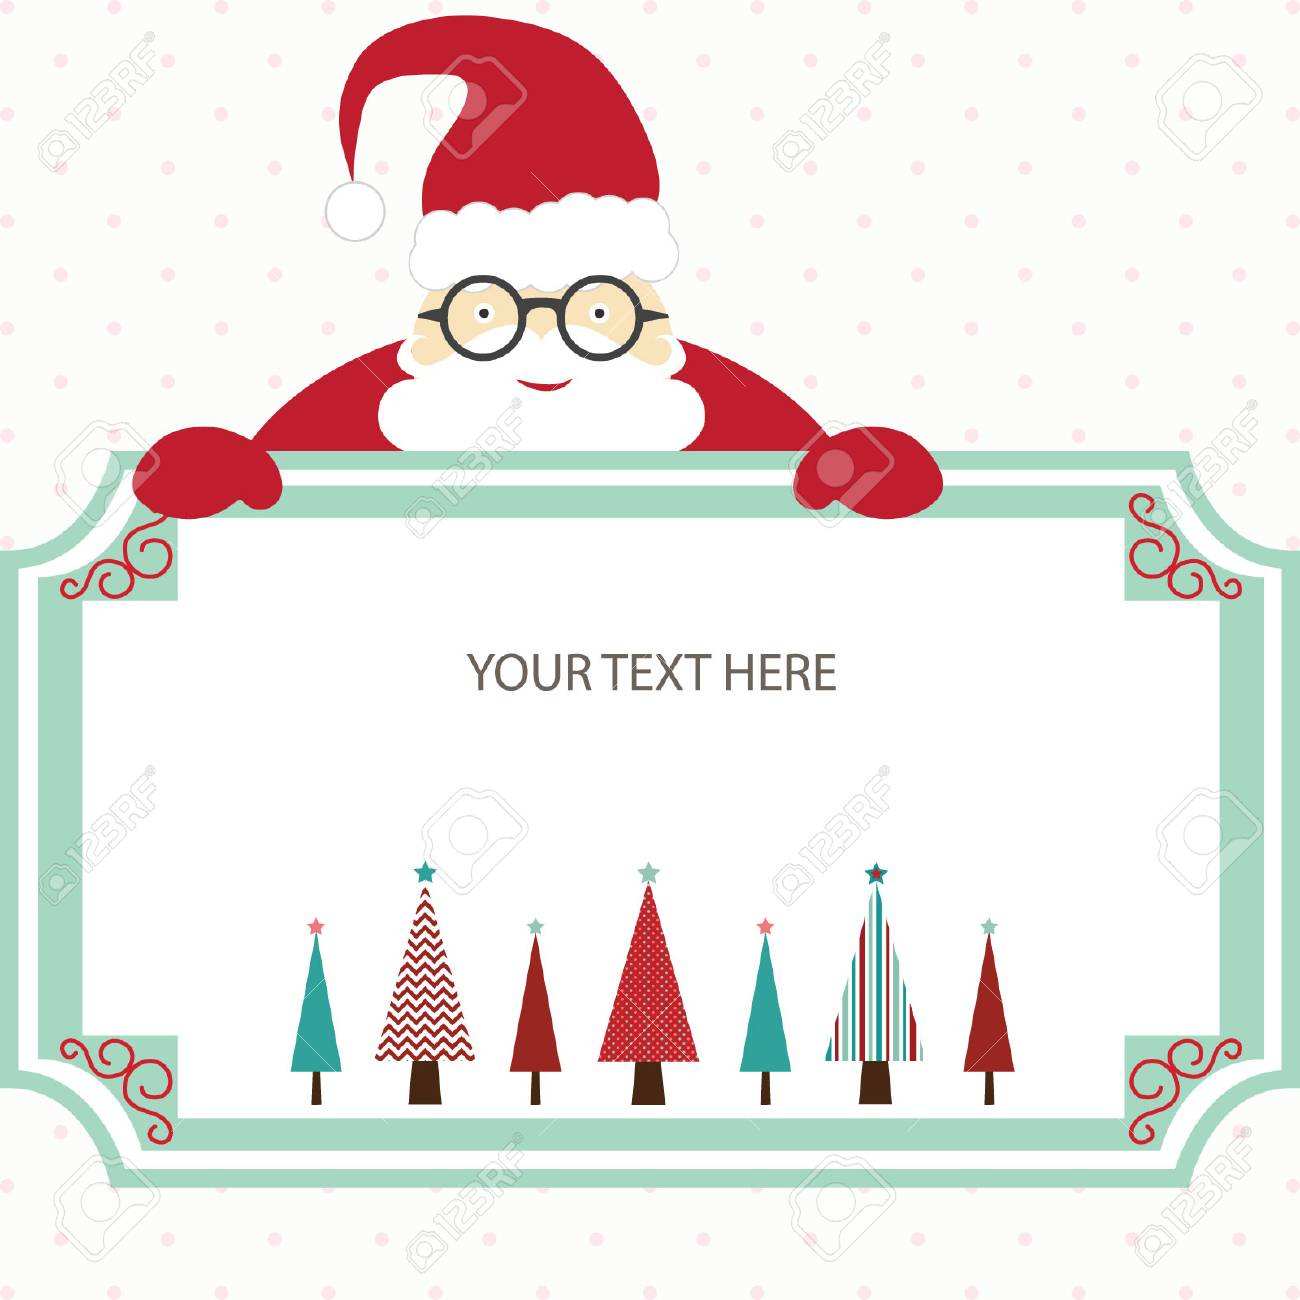 30 Christmas Tree Template For Card Making Download by Christmas Tree Template For Card Making